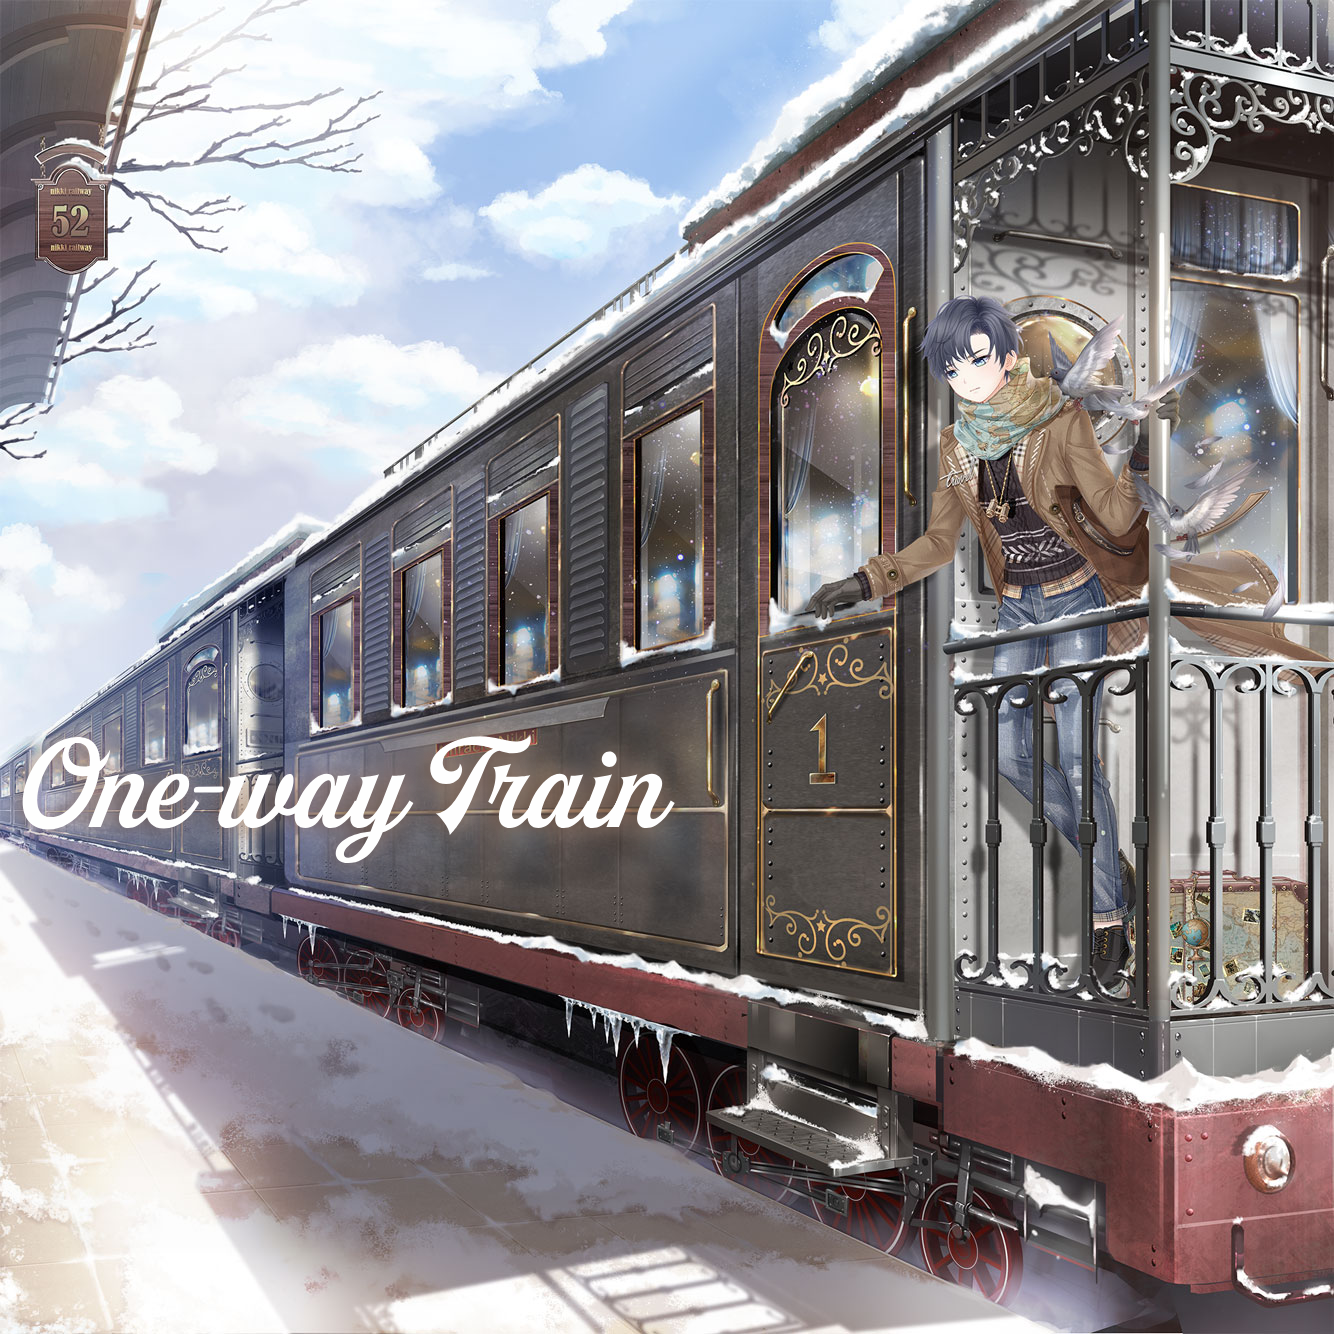 Orient Express: Inside the revamped legendary train - Lonely Planet